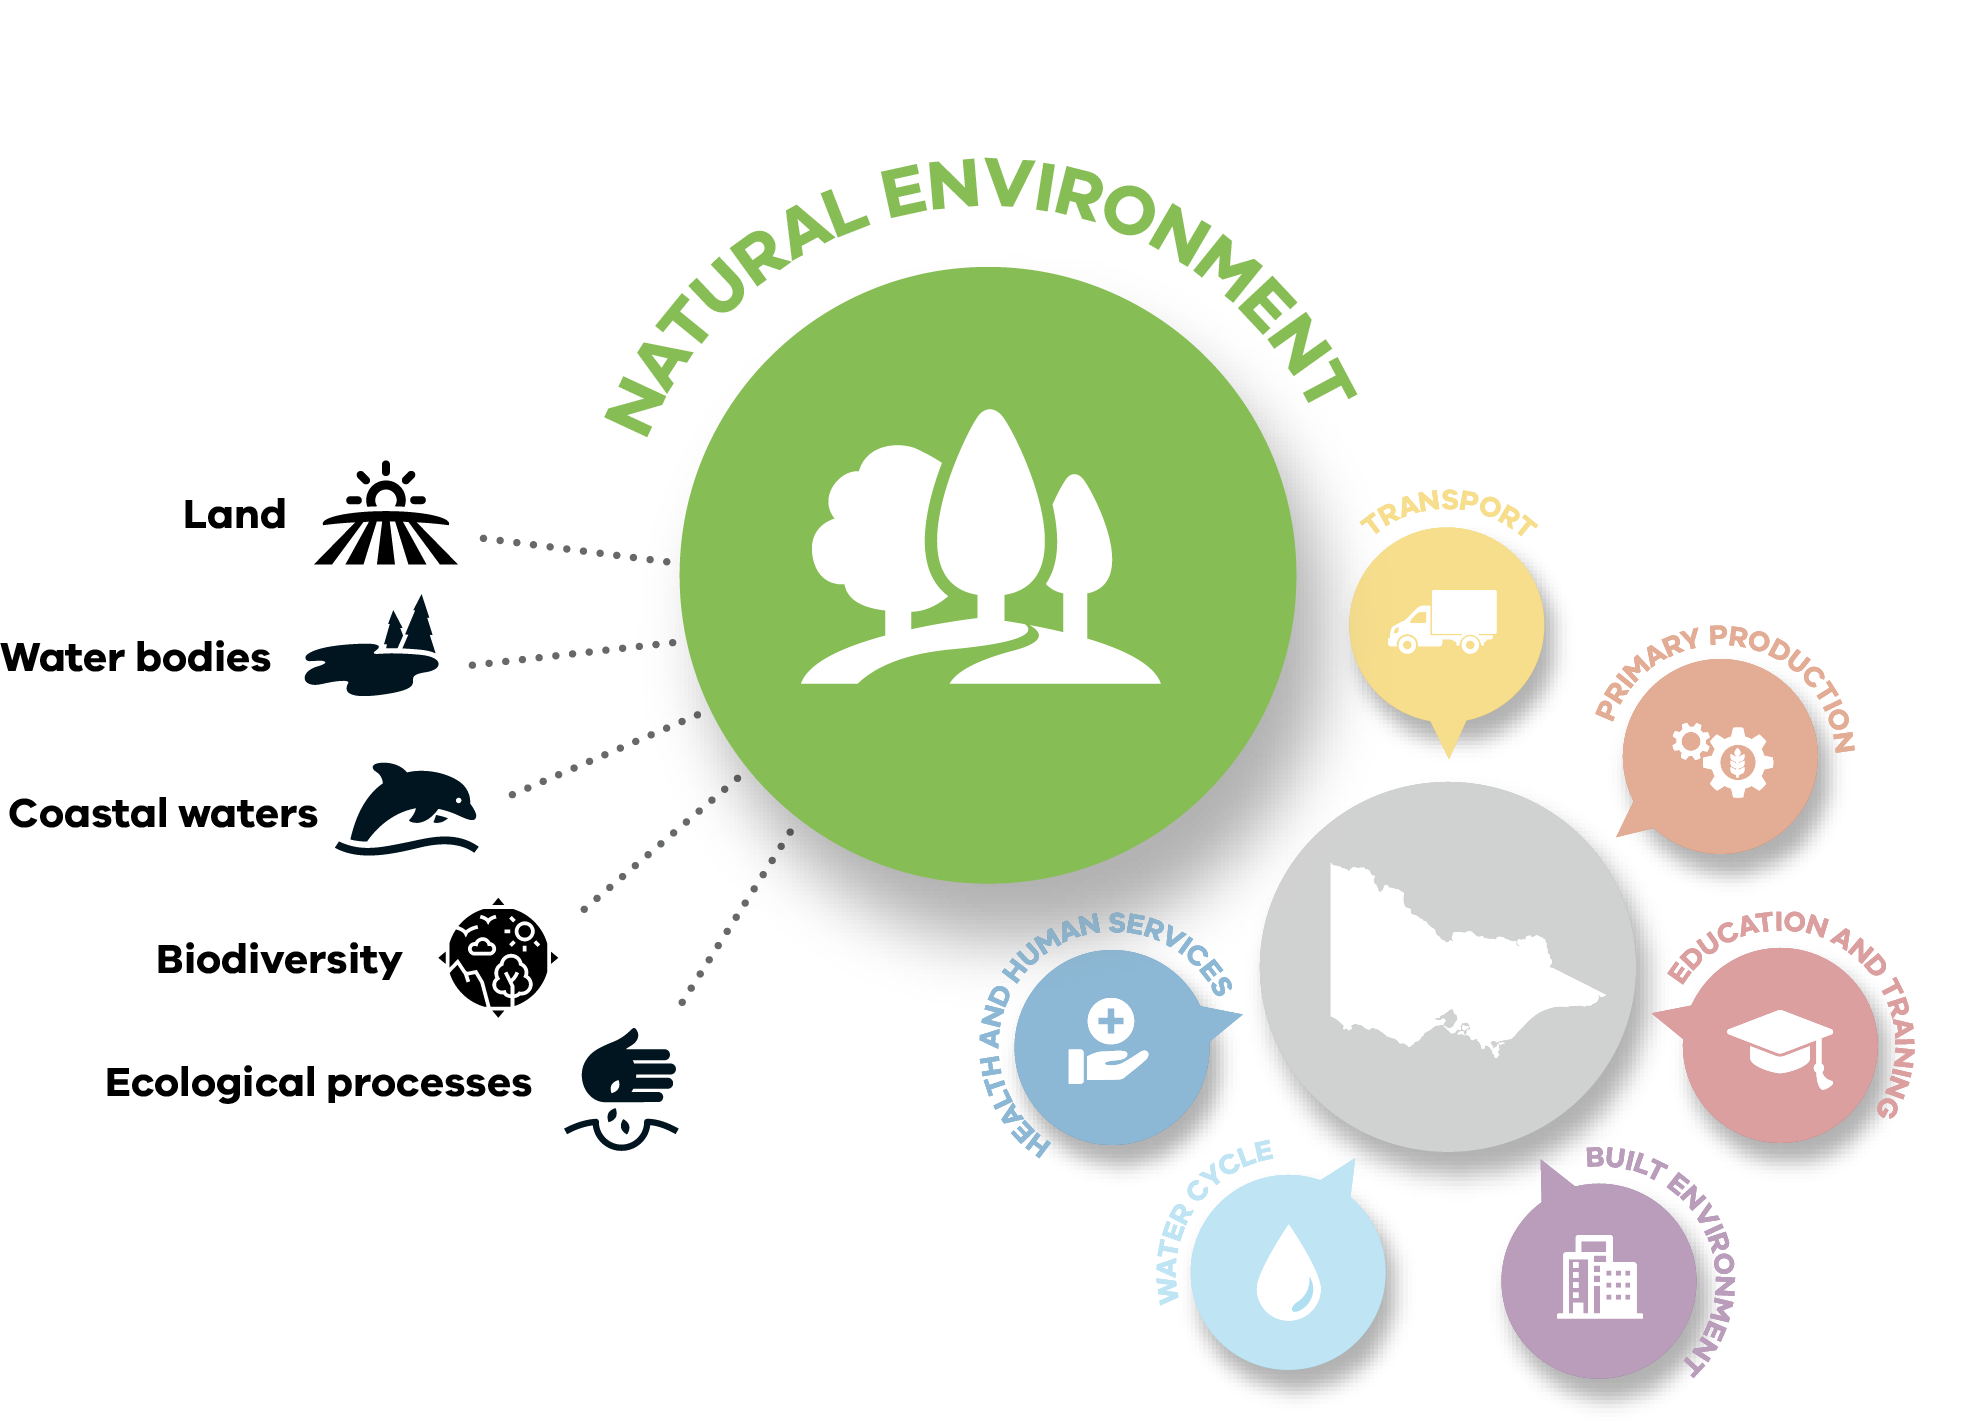 The Natural Environment is one of the seven Adaptation Action Plans, and includes Land ecosystems, water bodies, coastal waters, biodiversity, and ecological processes